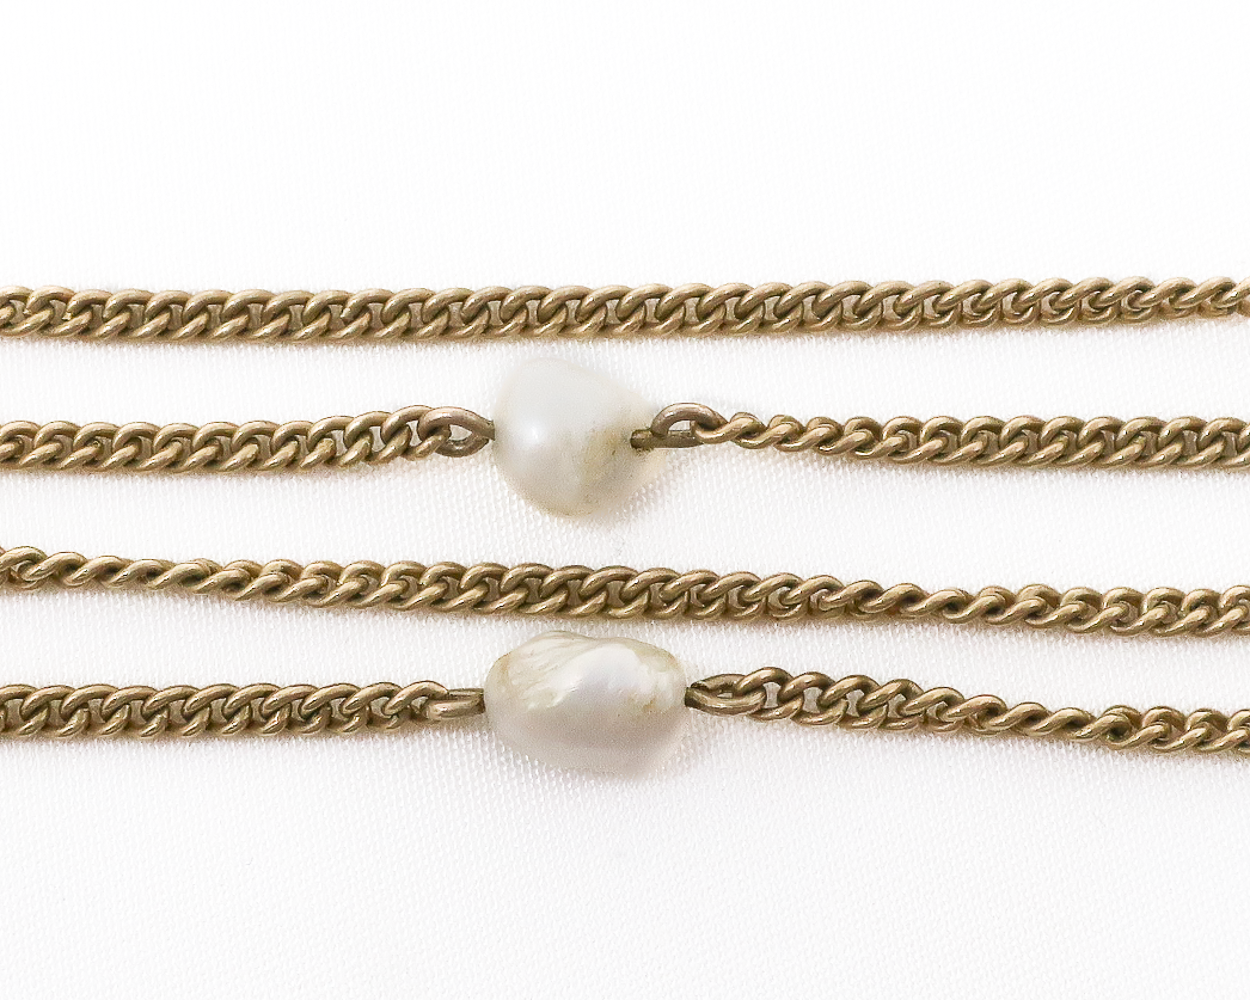 Victorian Gold Chain with Pearls